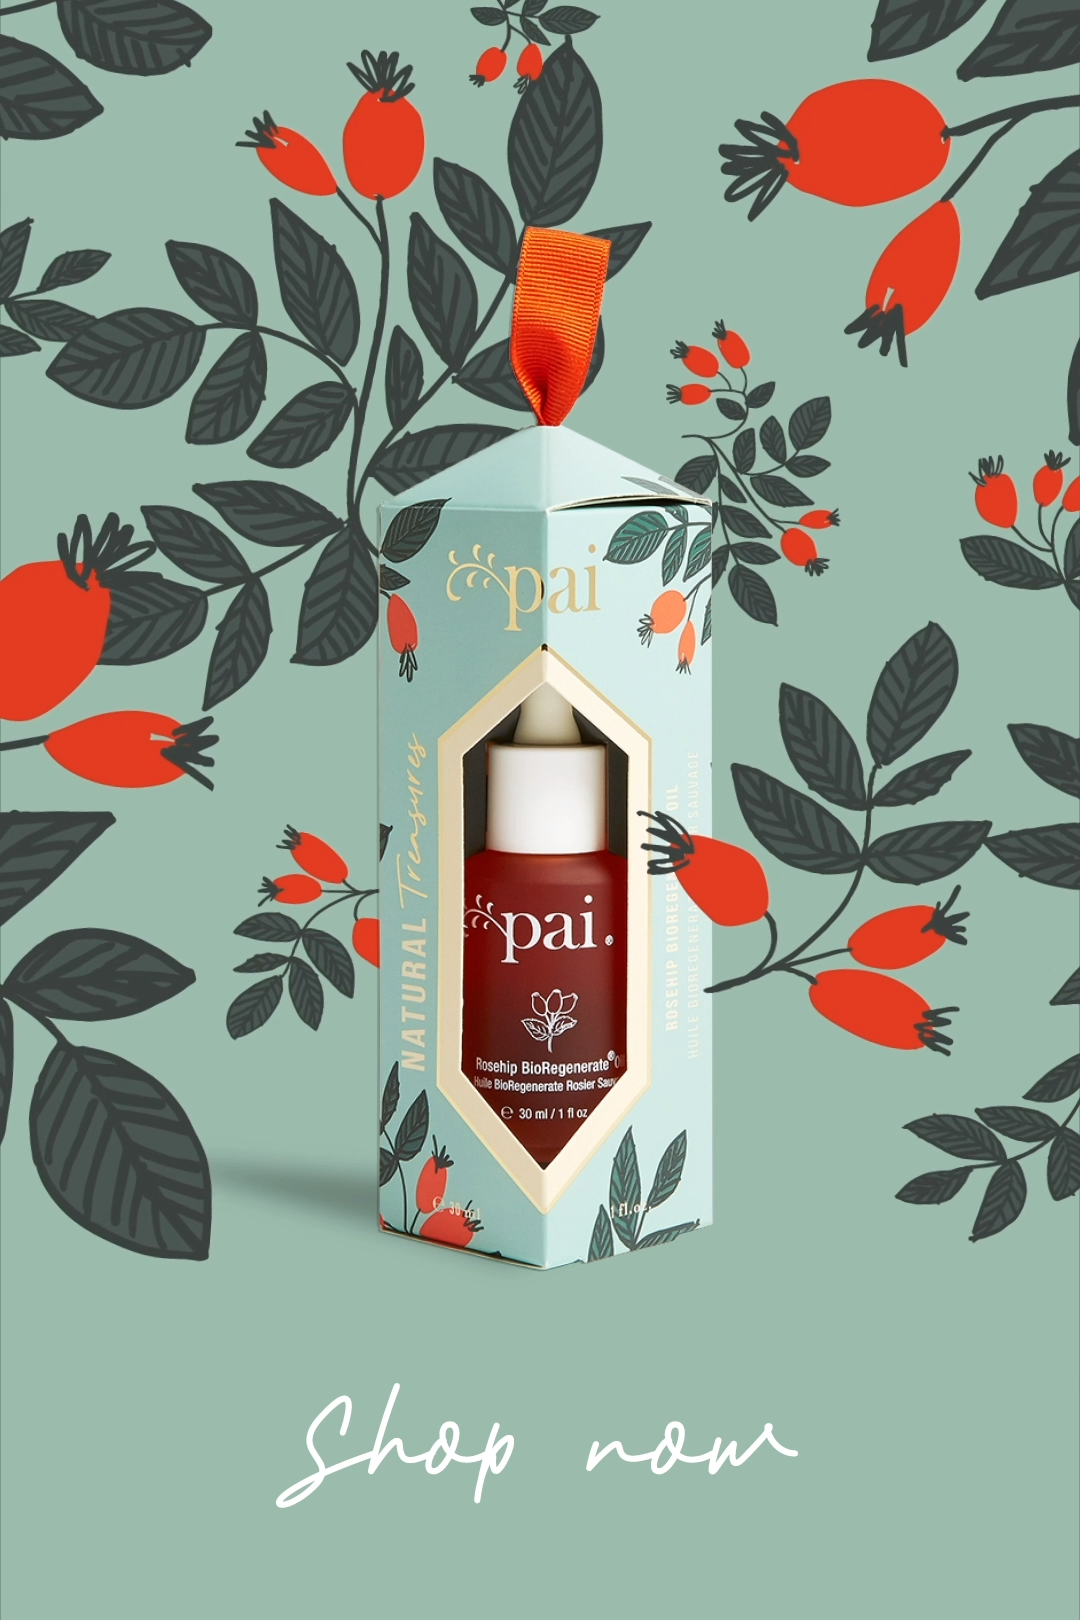 Our #1 Best-Selling Rosehip Oil, All Wrapped Up ? - Our #1 Best-Selling Rosehip Oil, All Wrapped Up ? -   13 beauty Box illustration ideas